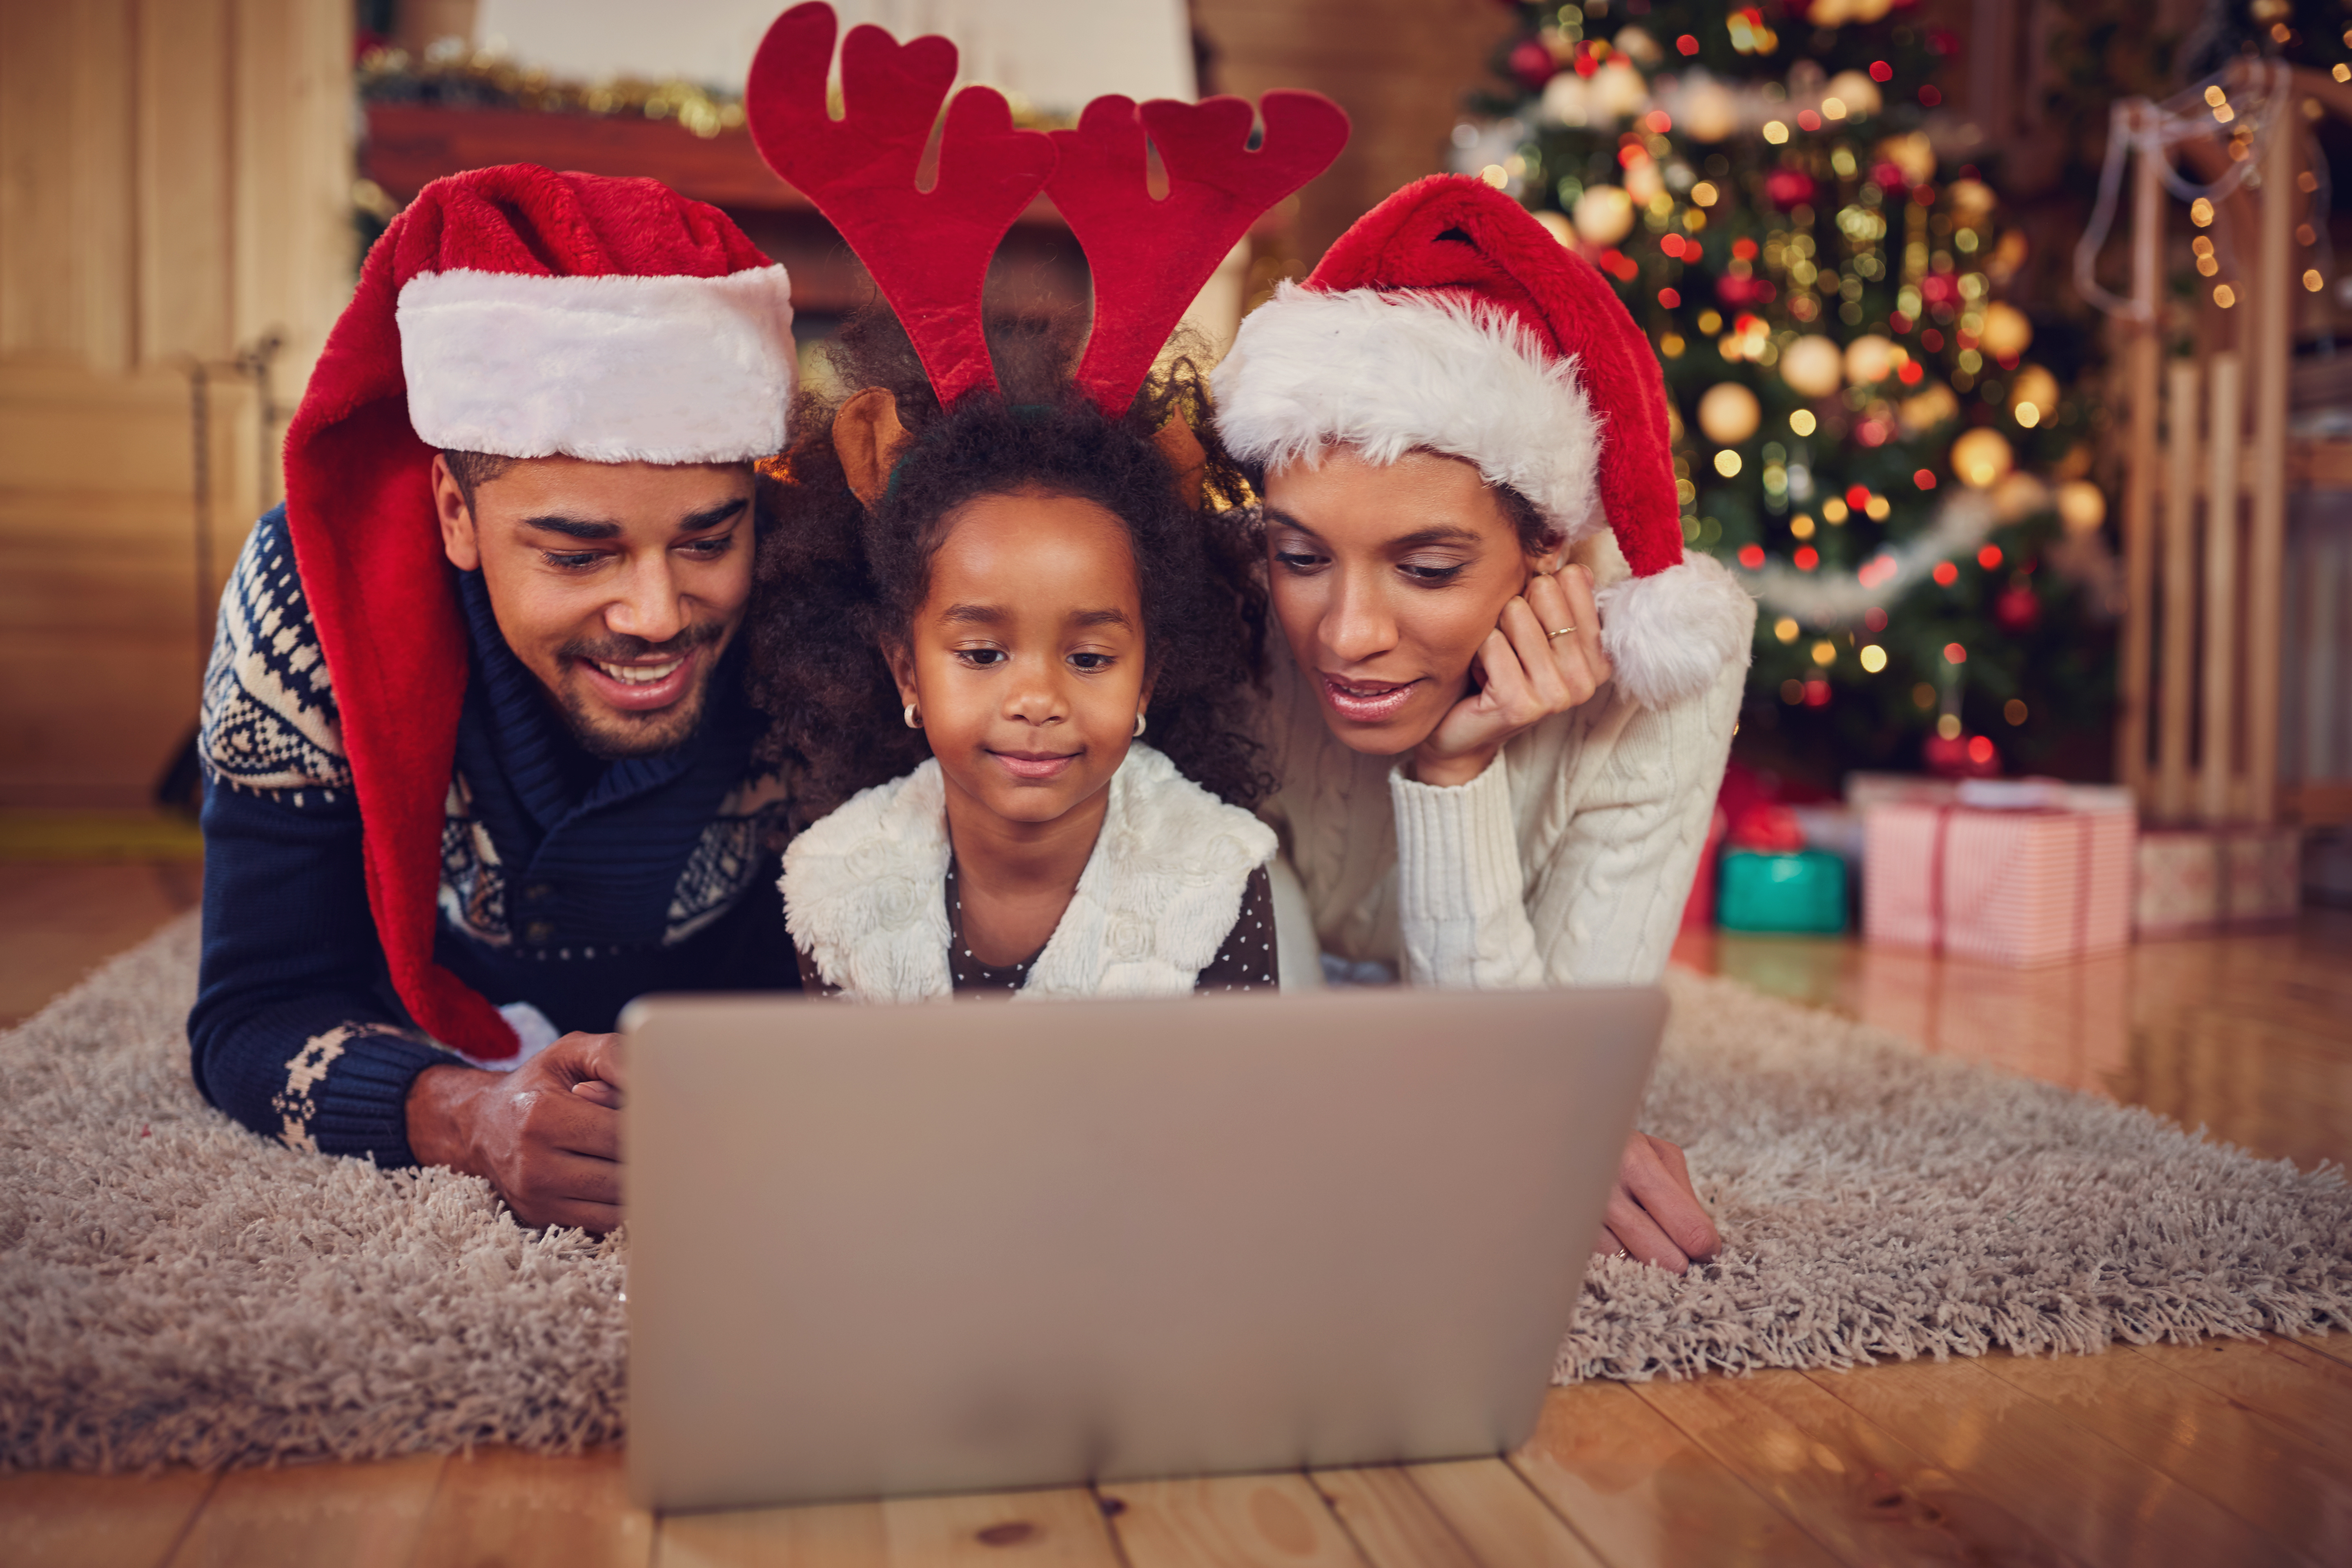 How to get the most out of your WiFi this festive season